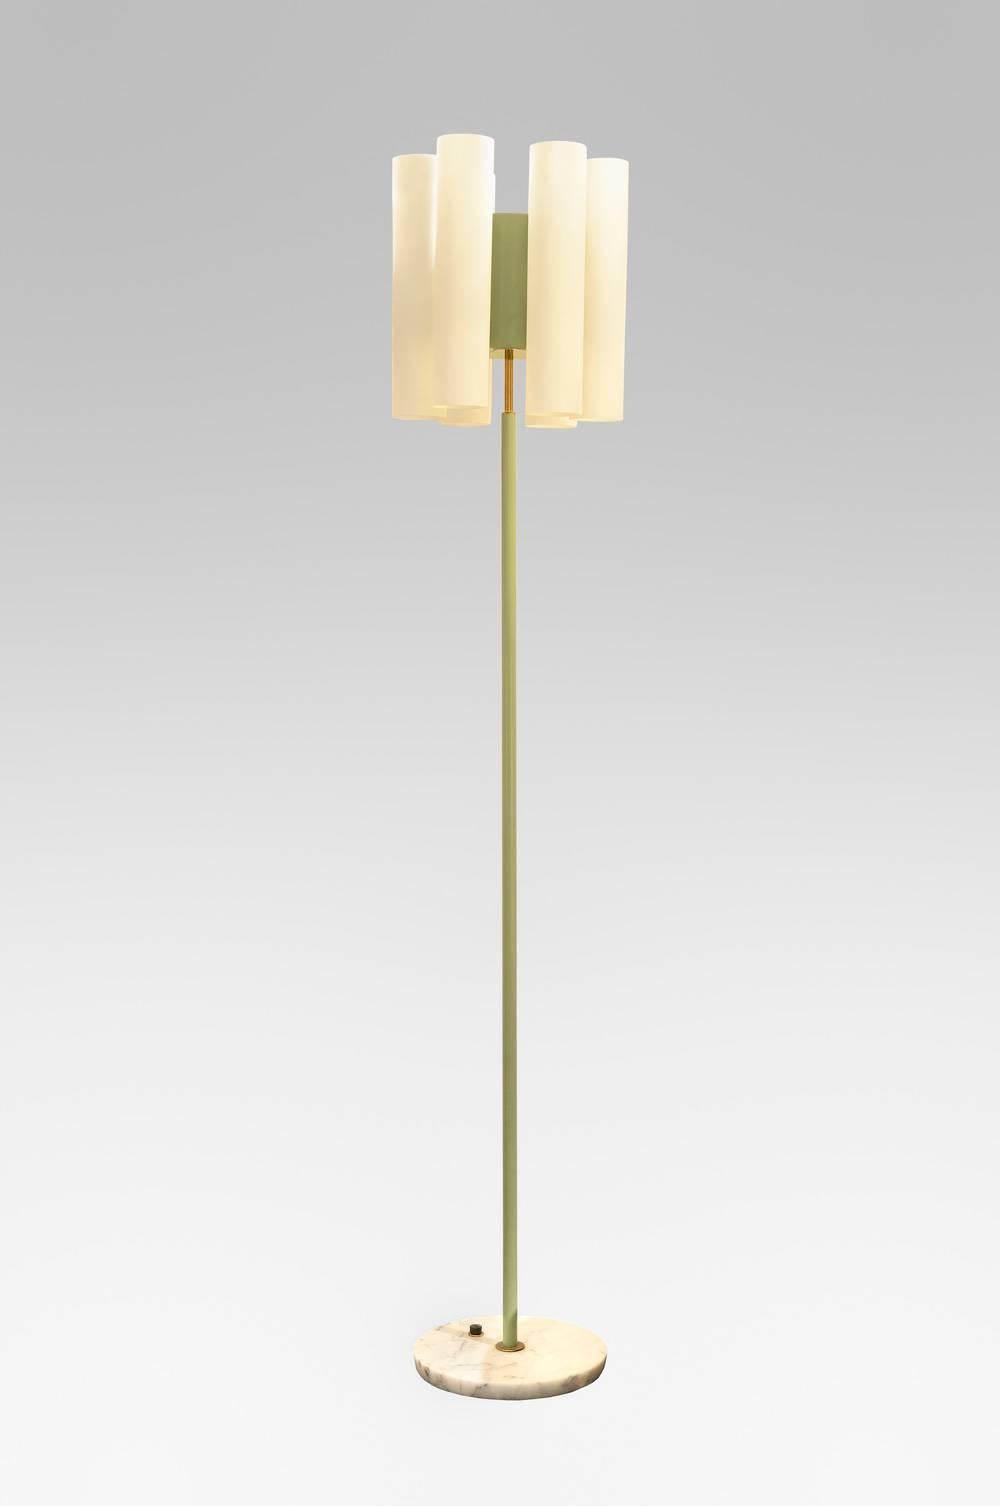 Elegant floor lamp by Stilnovo,

circa 1950,
Italy.

Almond green patinated metal.
Base in marble.
Six sconces frosted white glass.

Measures: H. 170 cm.
Diameter base 30 cm.
Top diameter 35 cm.

 